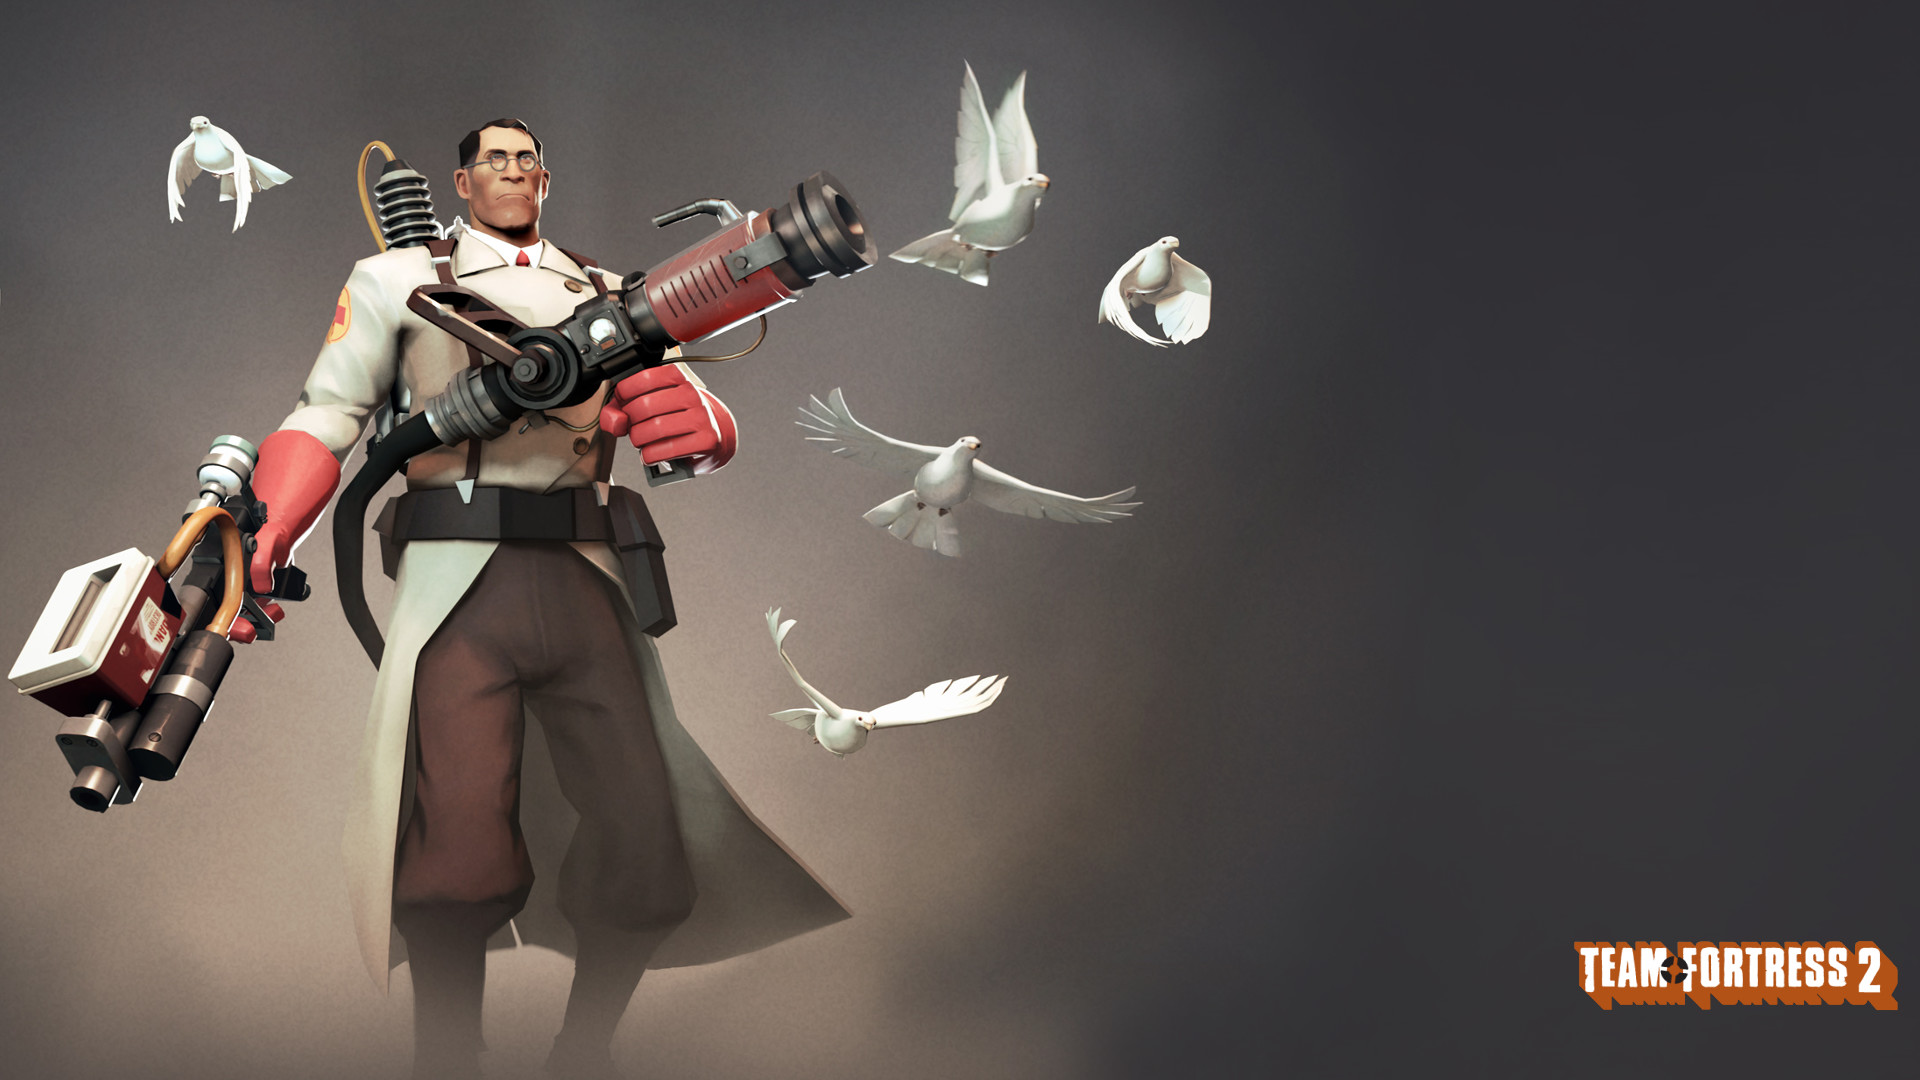 1920x1080 Friday 13th November 2015 04PM - 2560x1600 Team Fortress 2 Desktop  Wallpapers - Free Games Wallpapers | feelgrafix.com | Pinterest | Team  fortress and ...